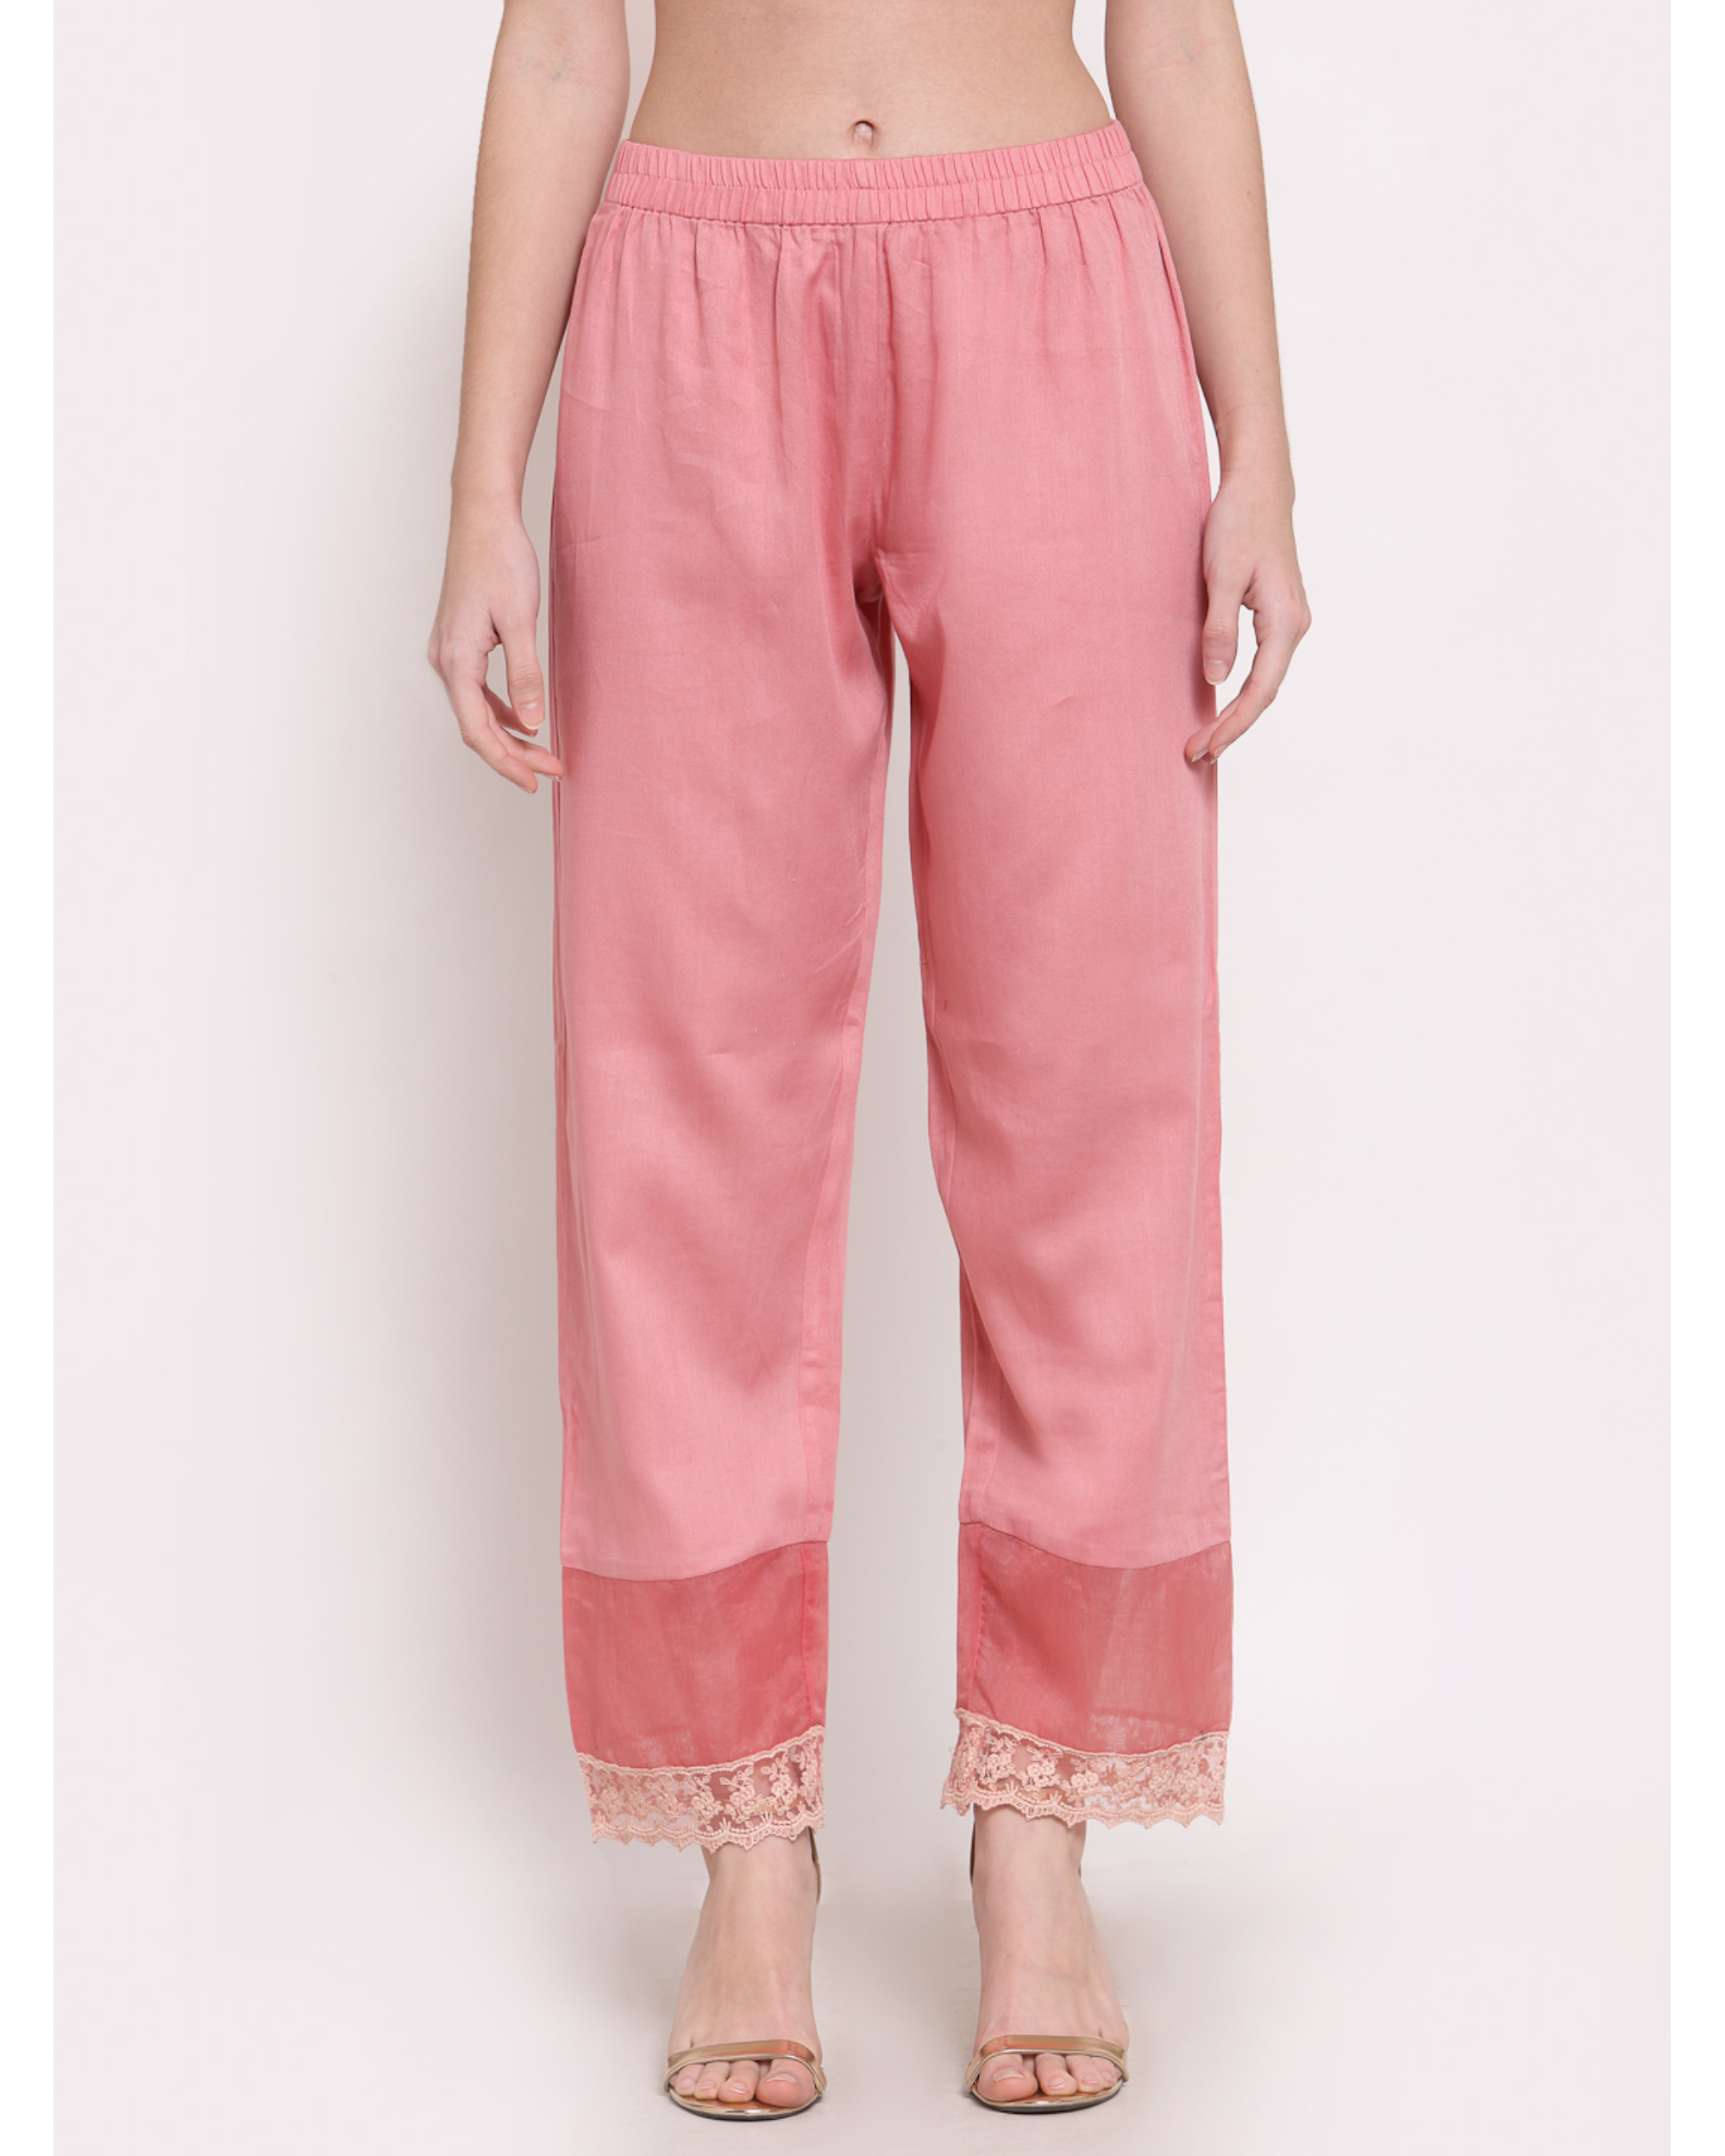 Solid Color Cotton Palazzo Pants in Rose PP0076 010000 27